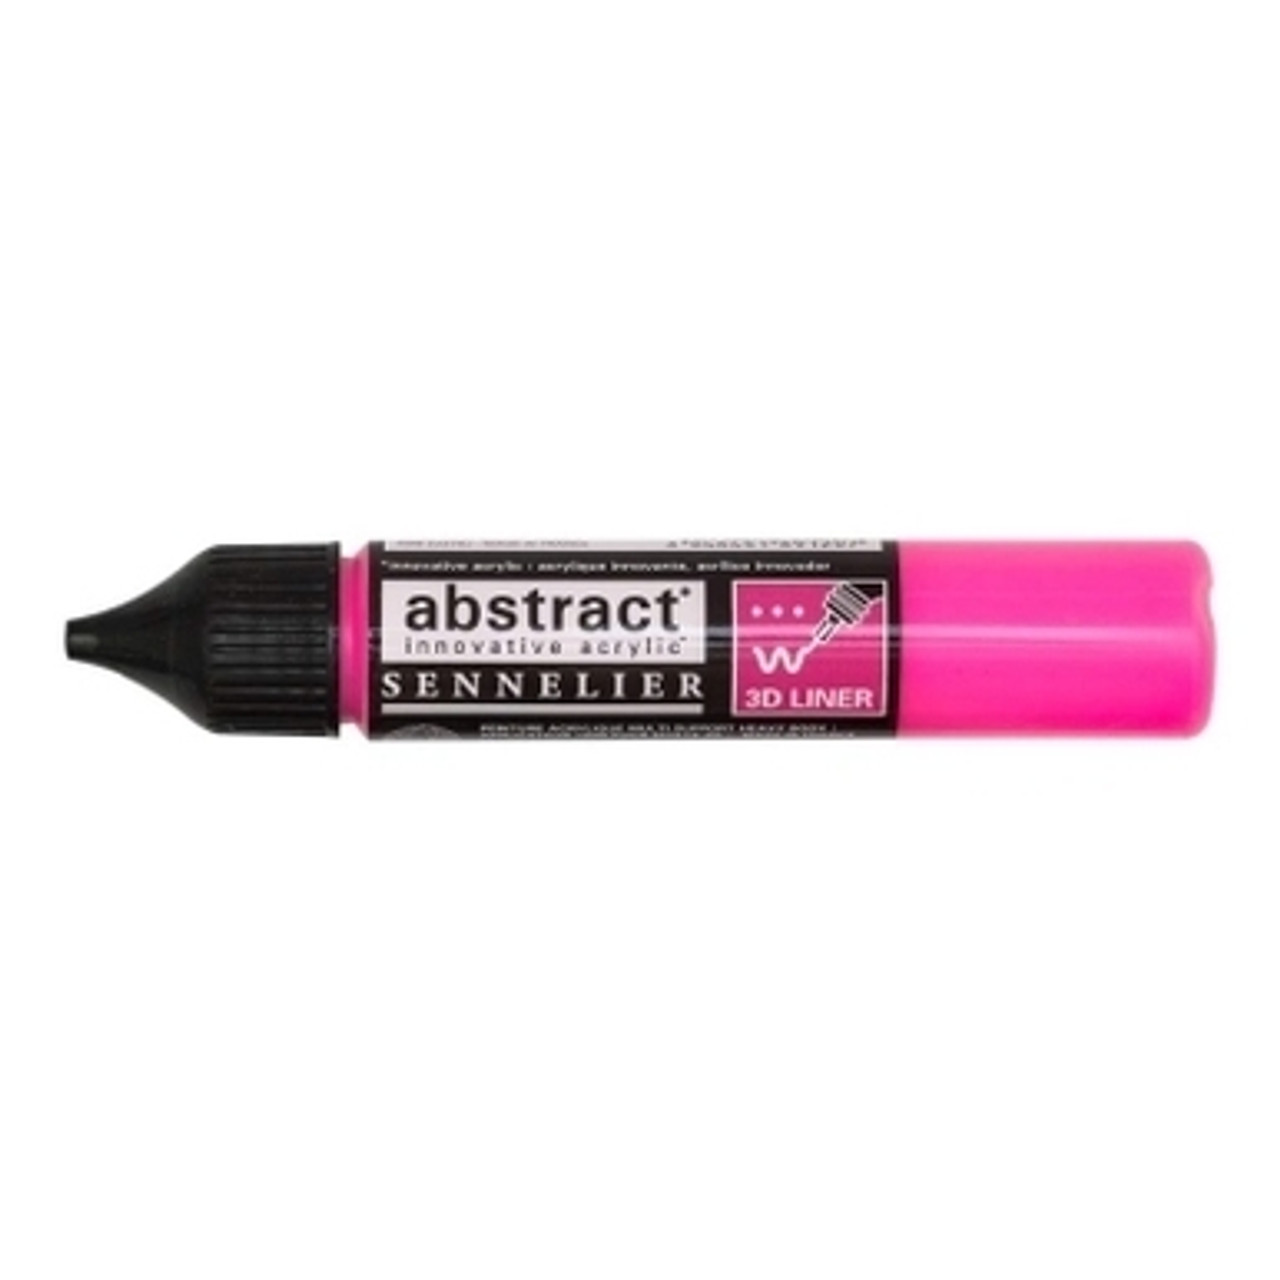 Sennelier Abstract Liner Fluorescent Pink